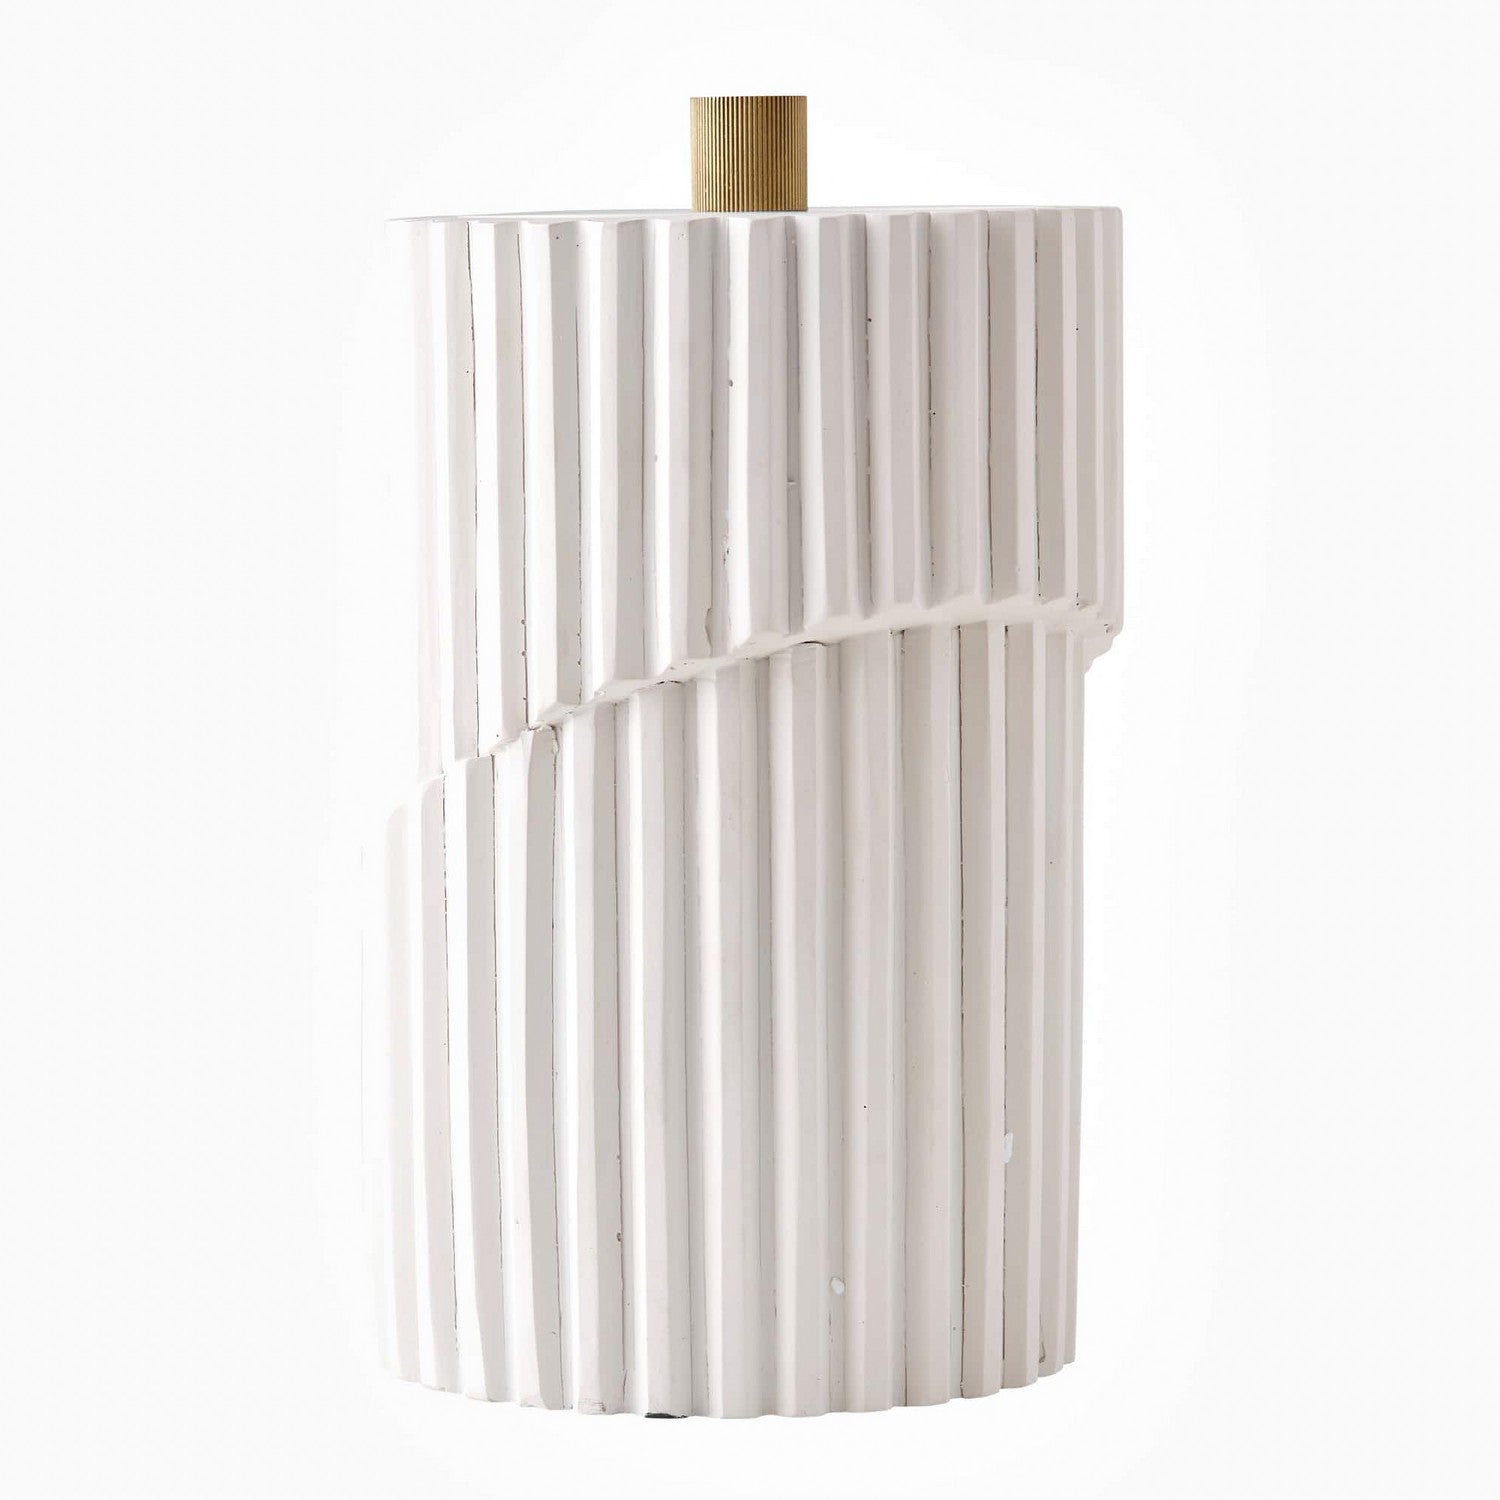 Container from the Whittaker collection in Ivory finish